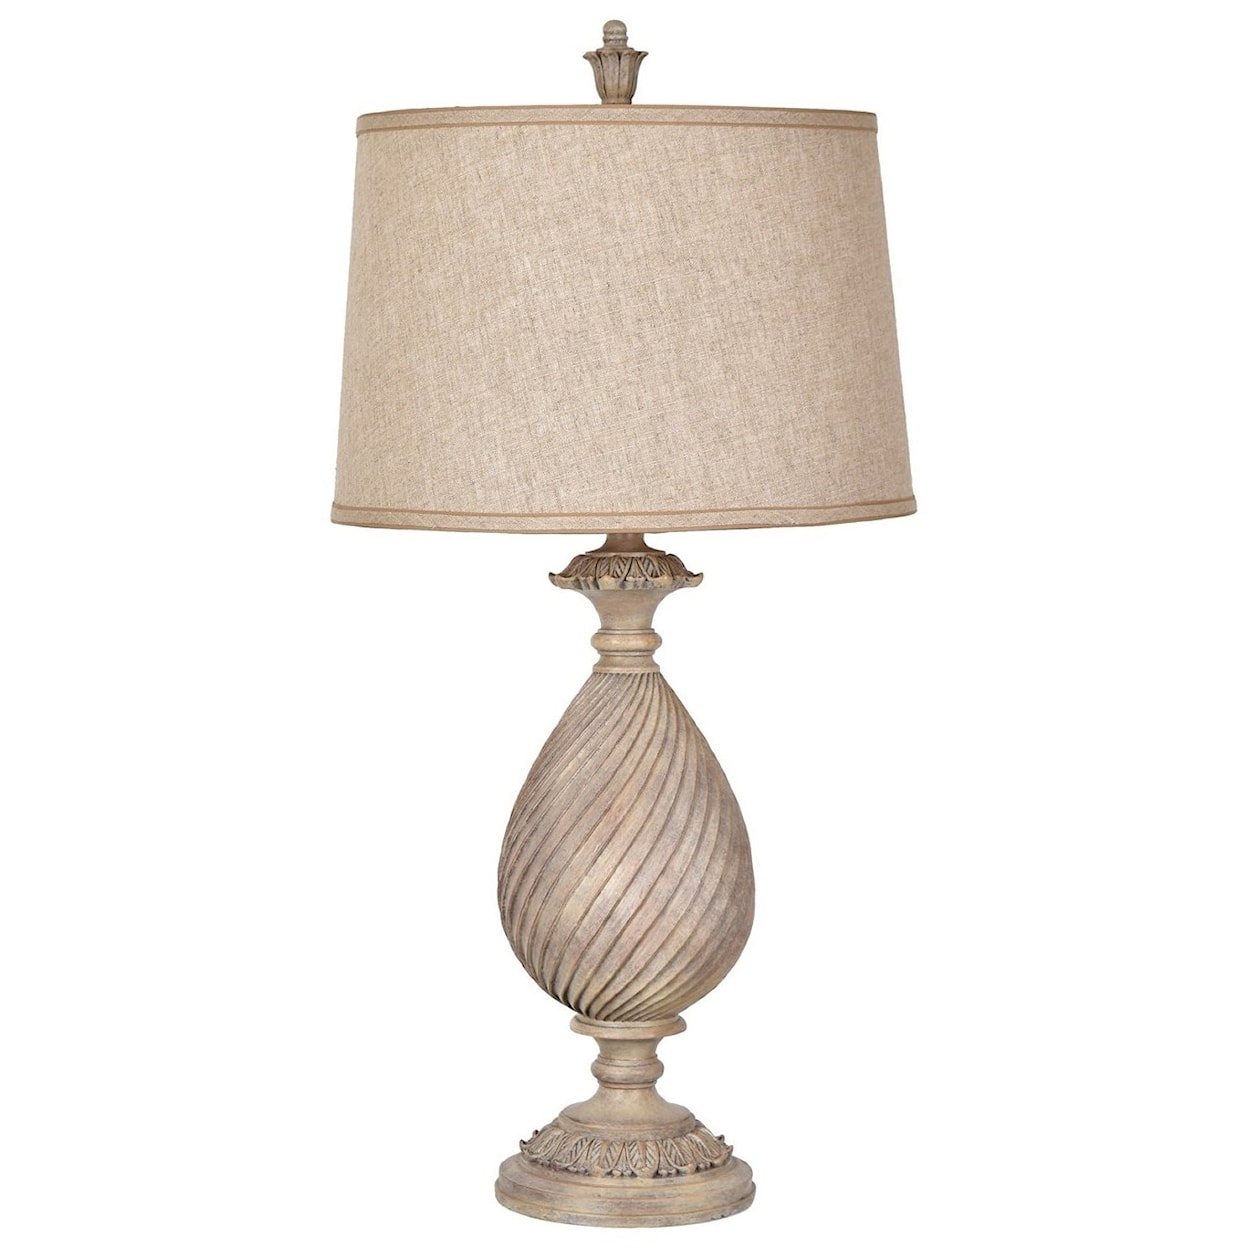 Crestview Collection Lighting Sutton Table Lamp